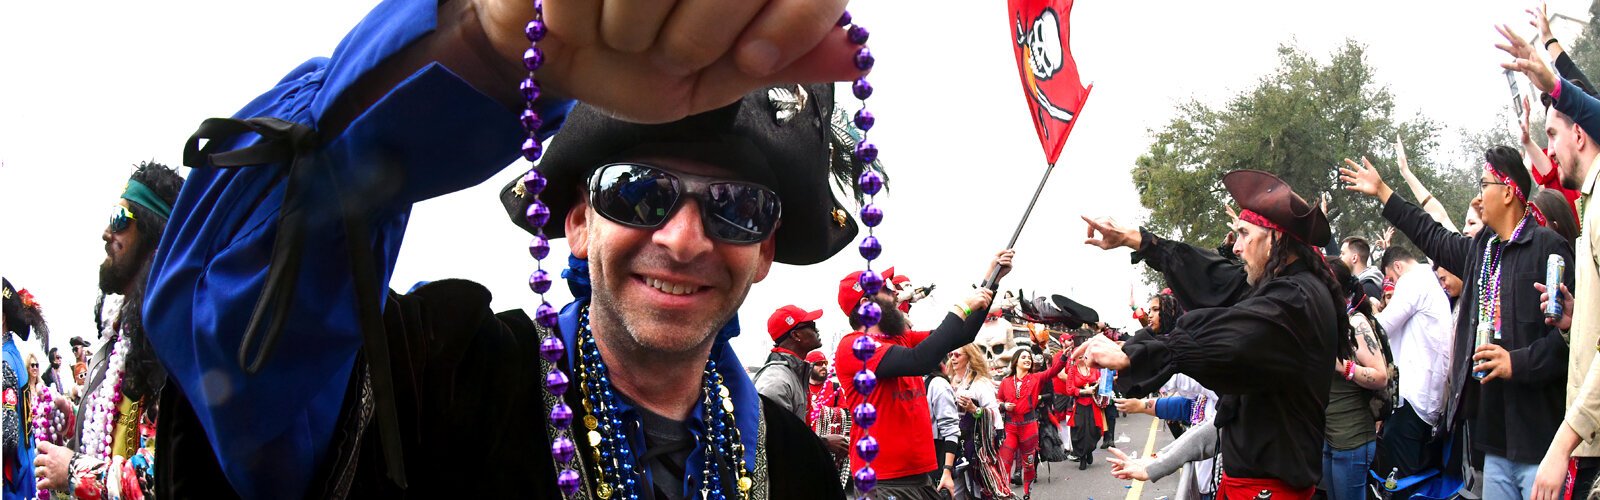 Founded in 1904, the Gasparilla Parade of Pirates is an annual tradition dear to the City of Tampa during which tons of colorful beads are handed out or tossed to the parade goers.